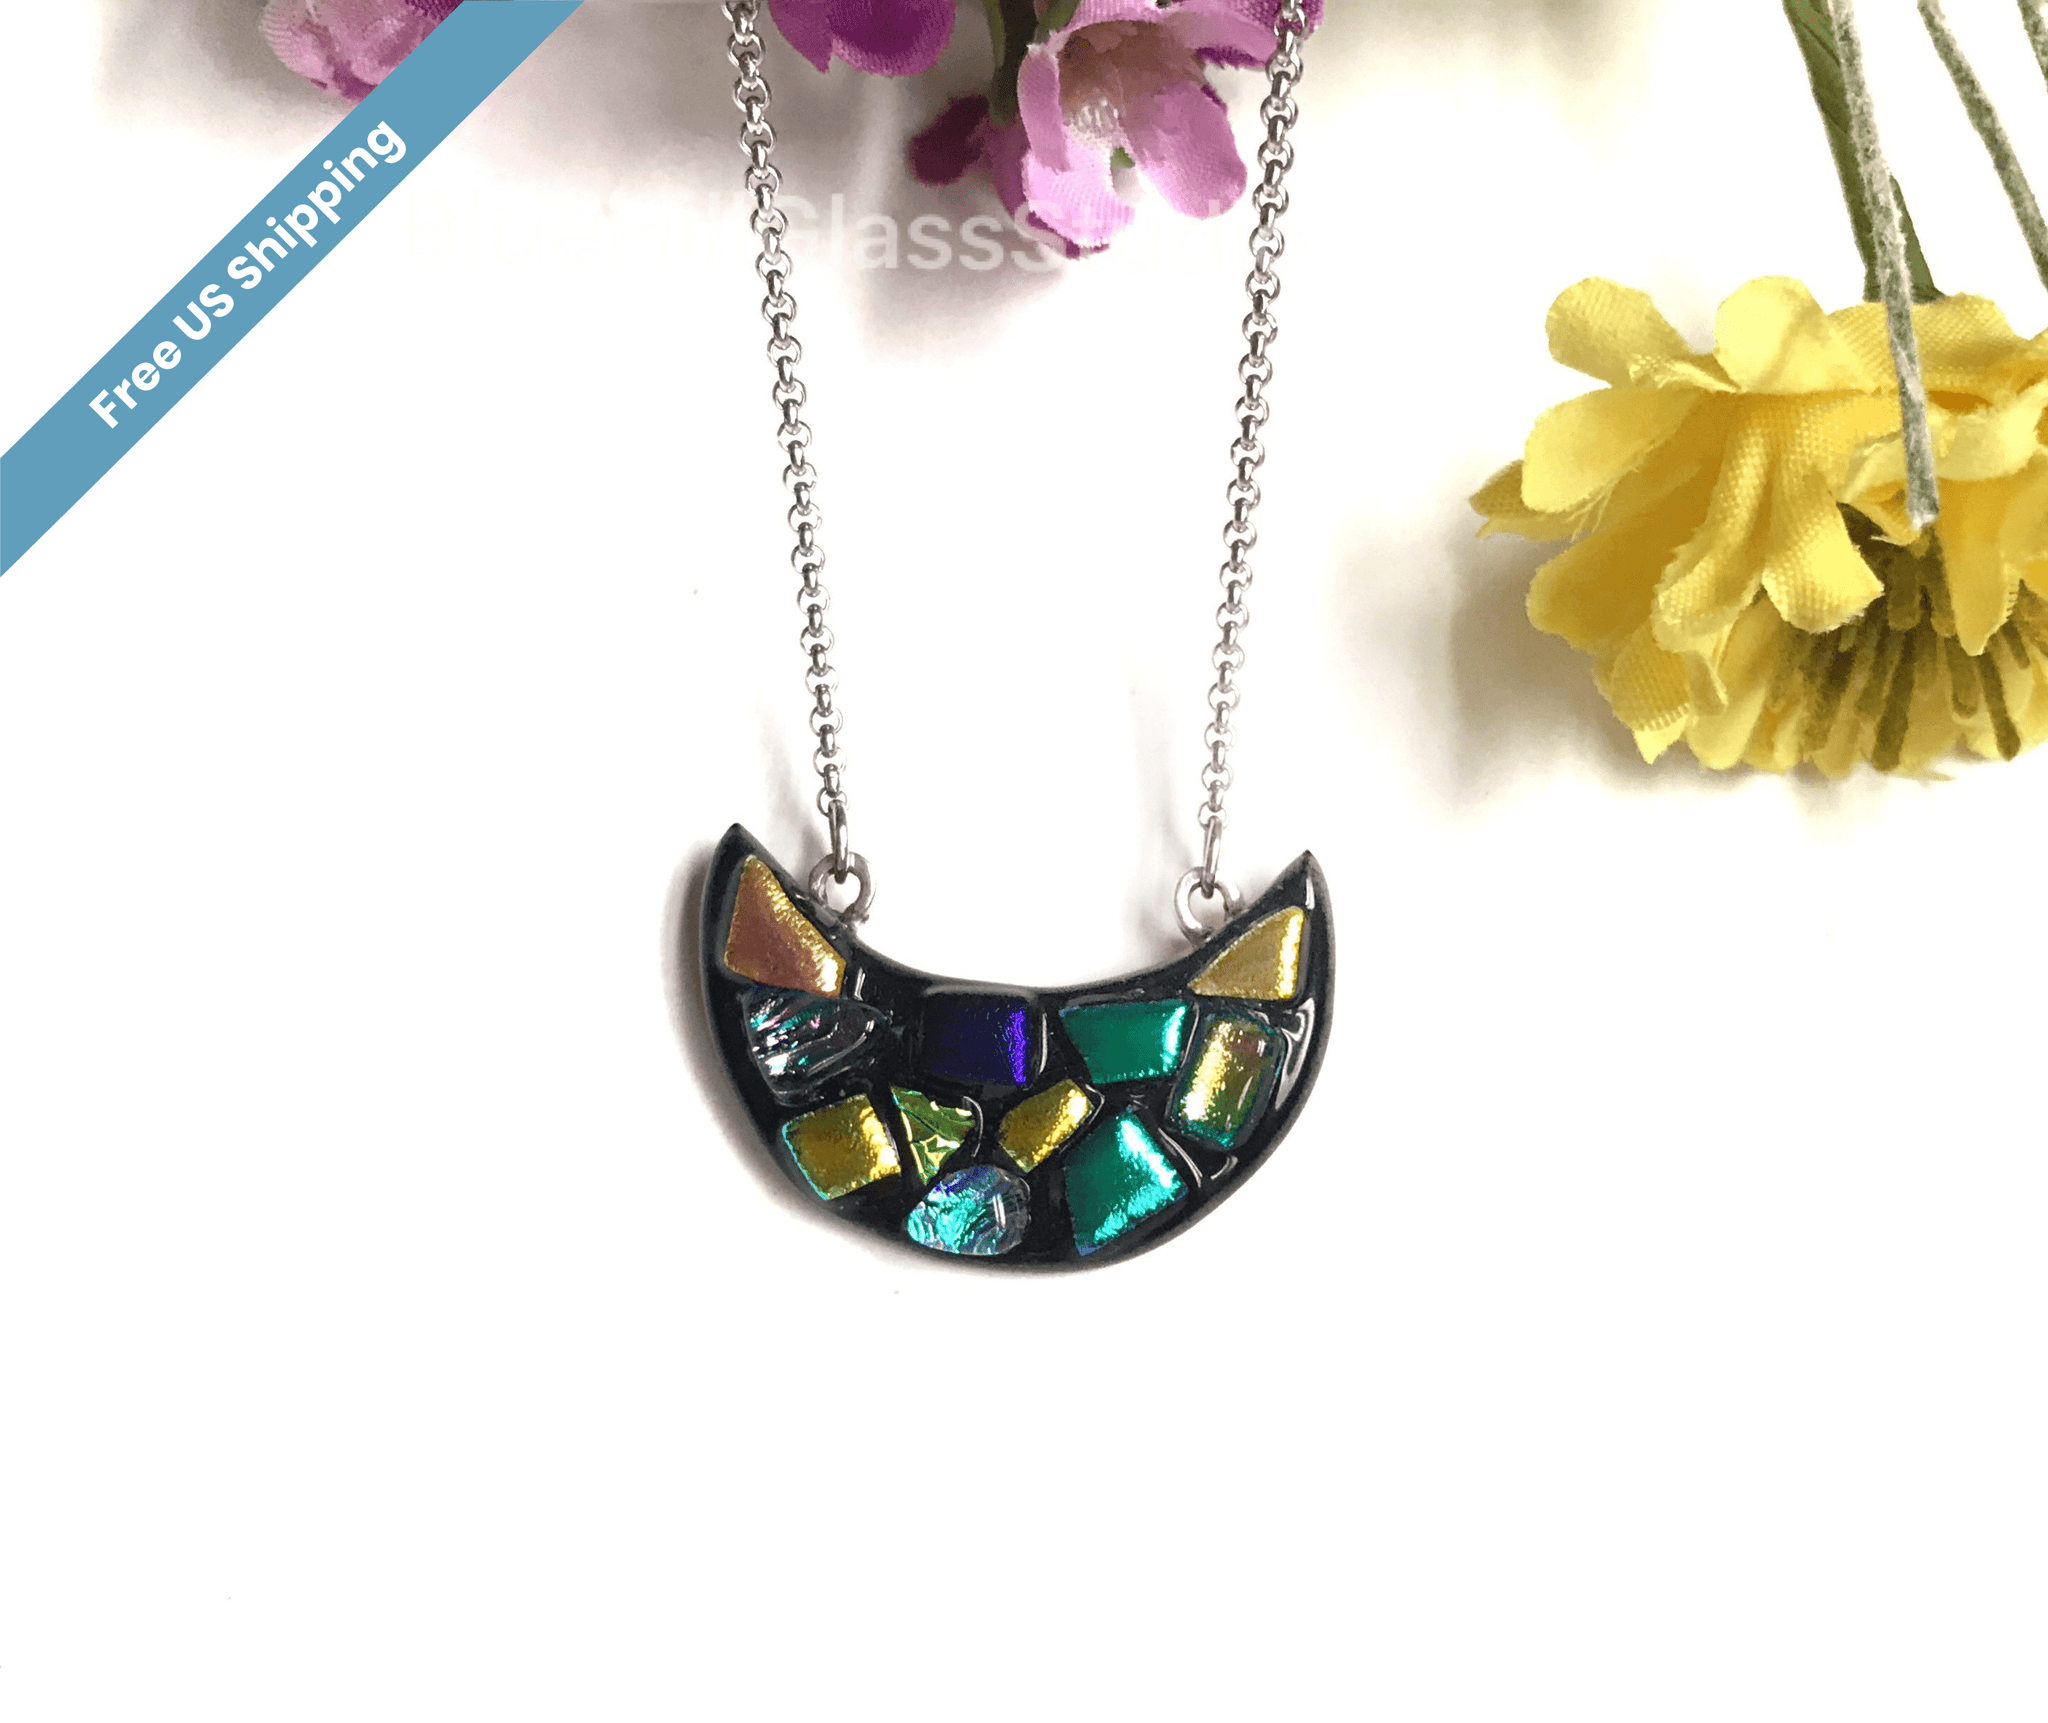 Crescent Moon Dichroic Fused Glass Pendant with Stainless Steel Necklace